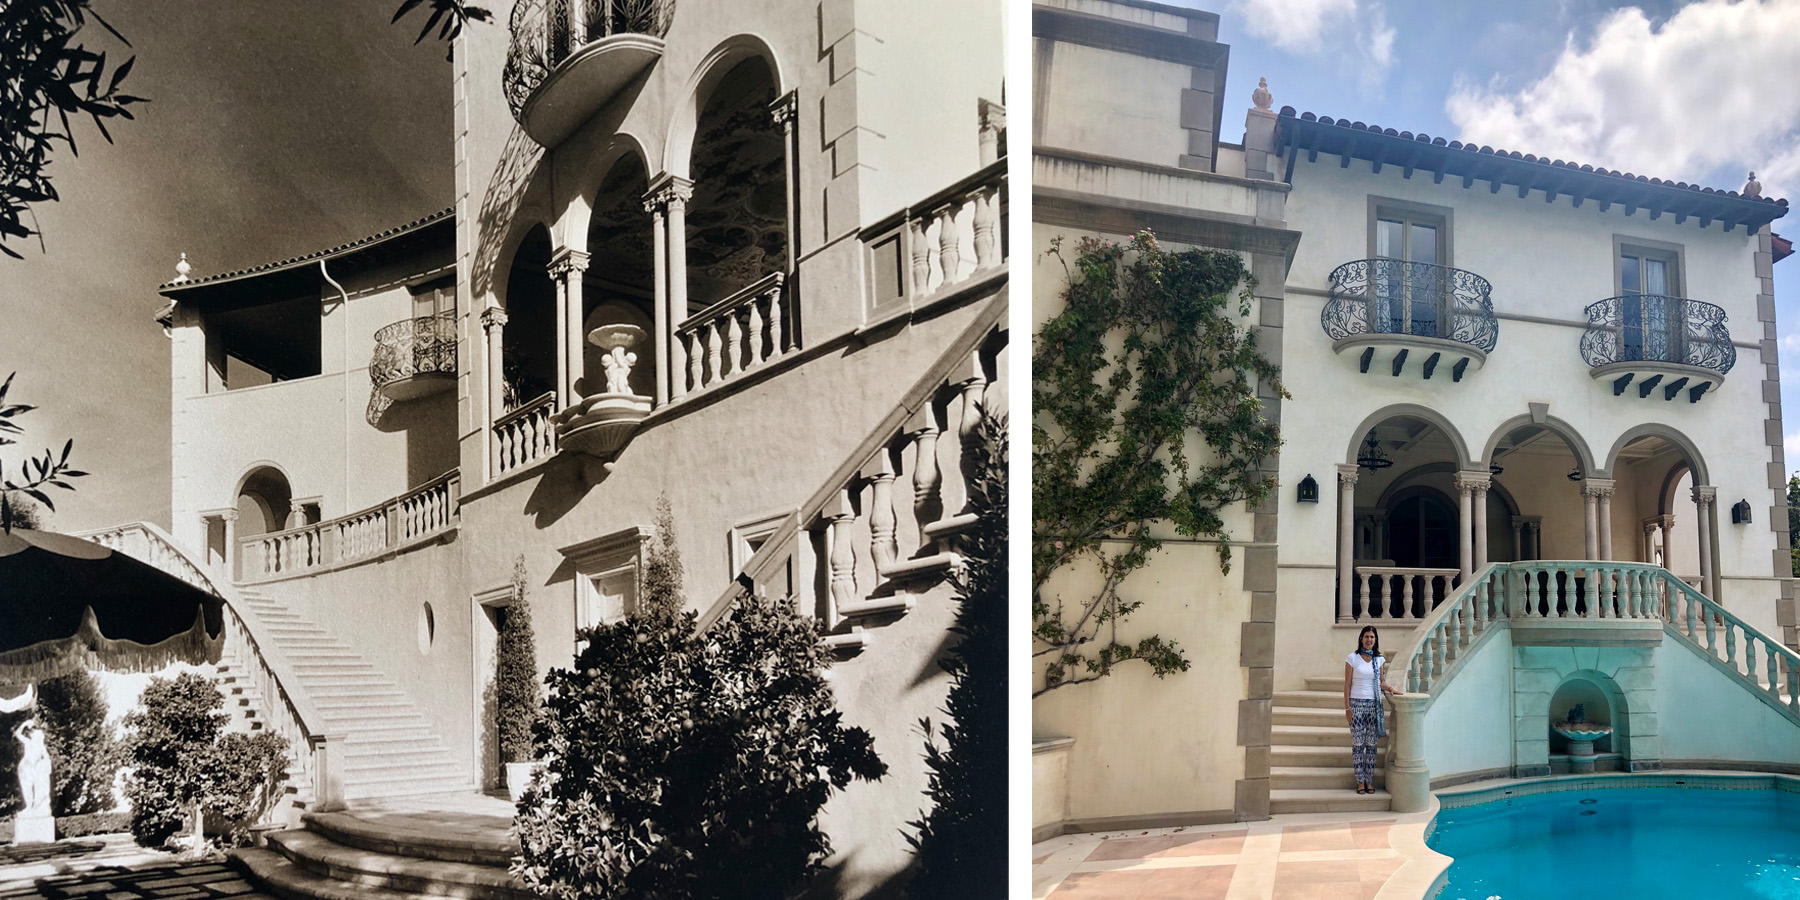 Sharon Rosen Lieb in front of her great-grandparents house, pictures then (1935) and now (2018)